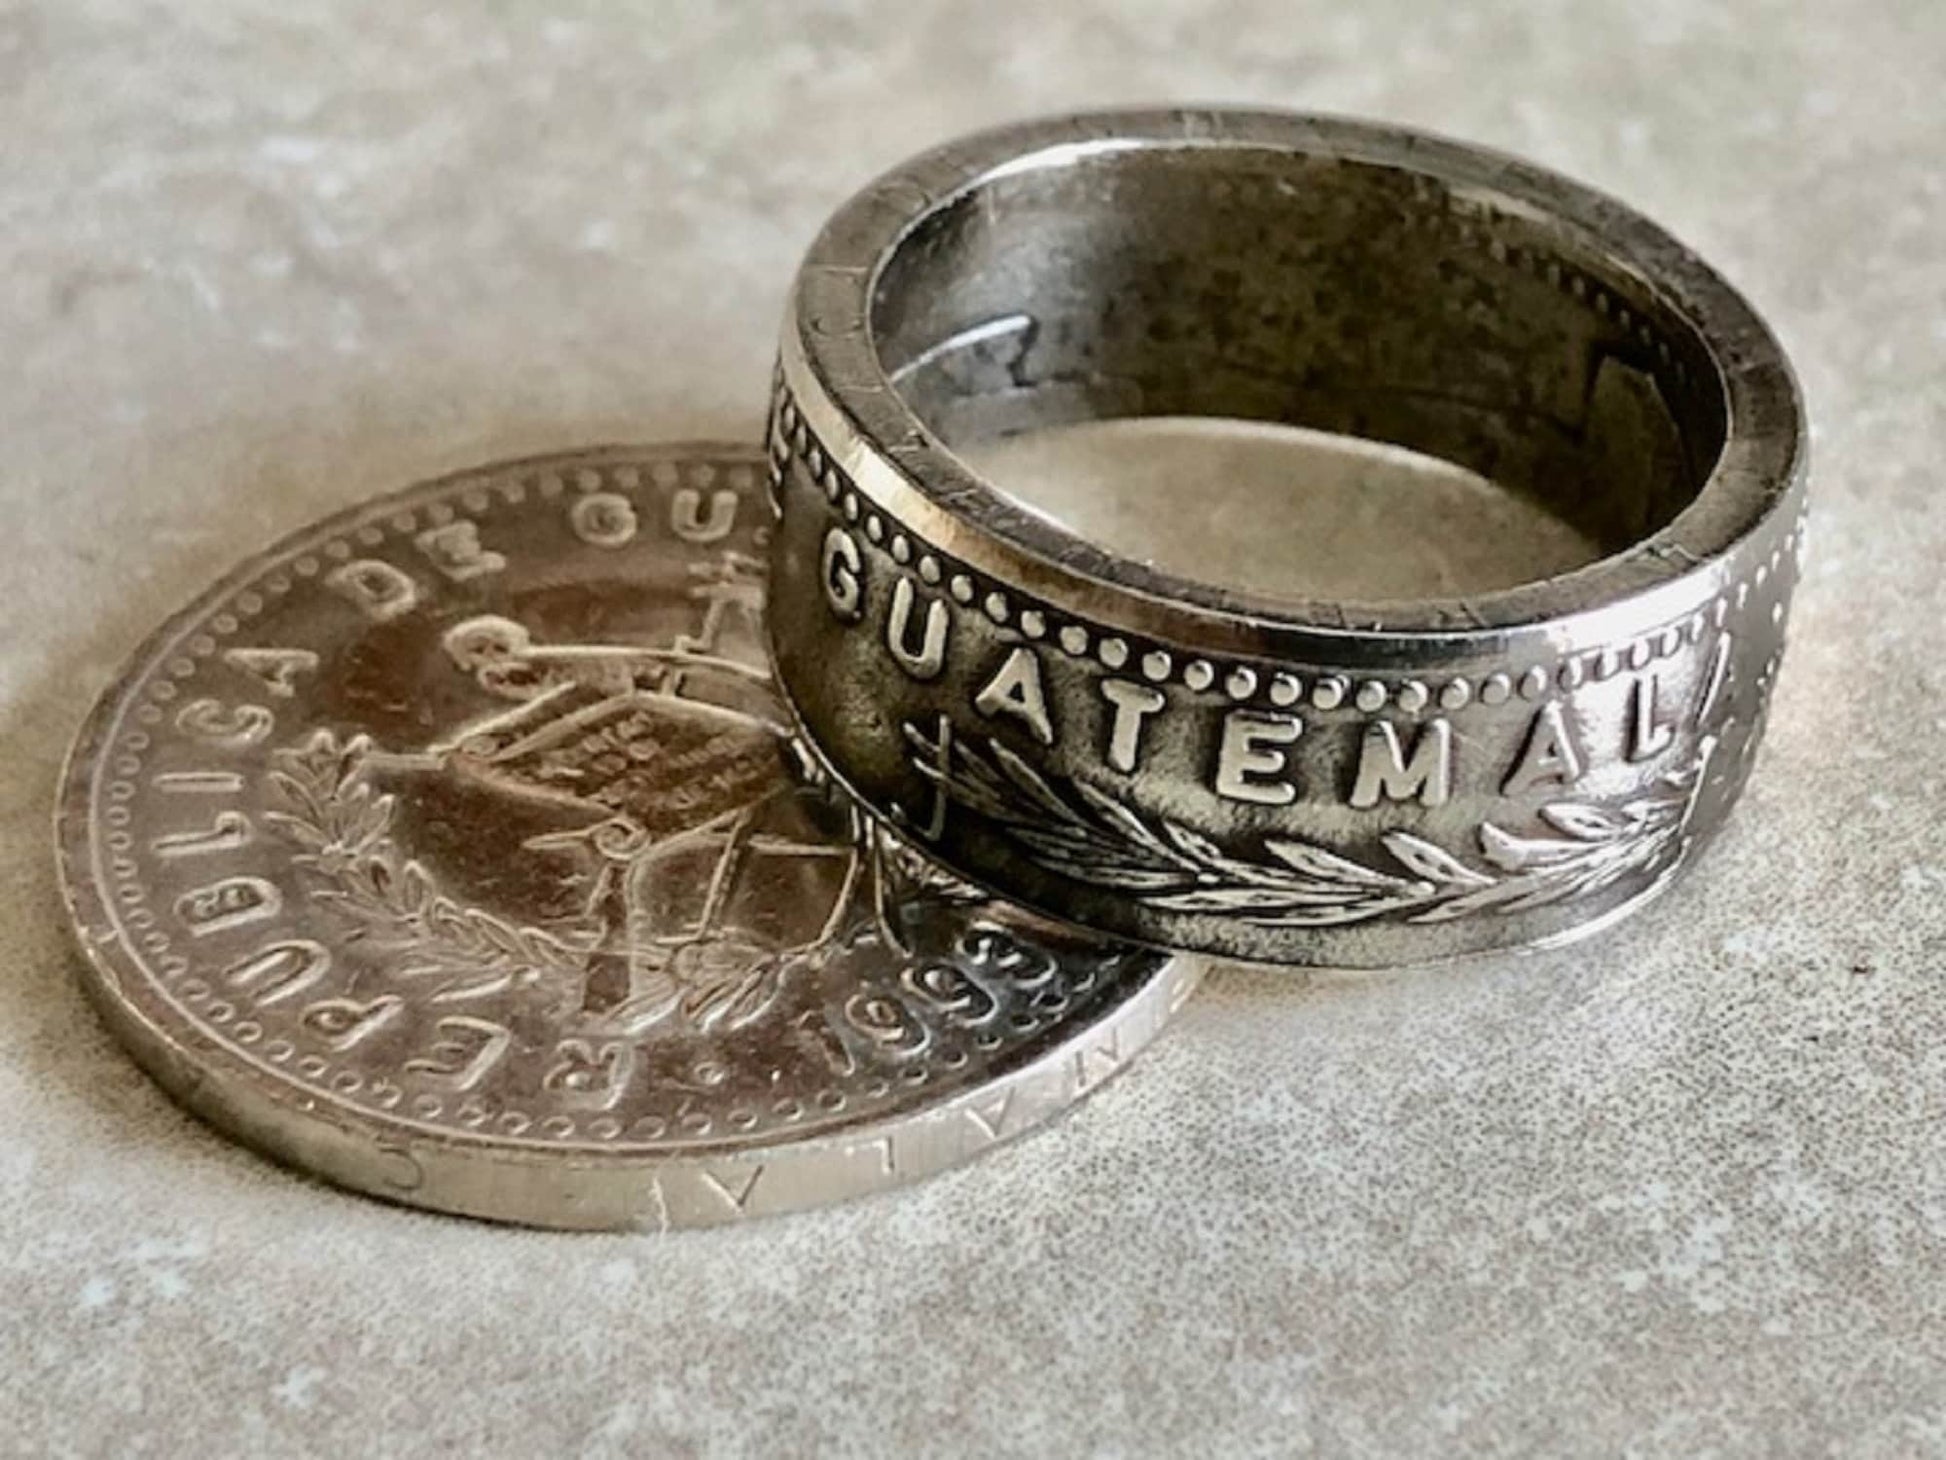 Guatemala Ring Guatemalan Coin Ring Handmade Personal Jewelry Ring Gift For Friend Coin Ring Gift For Him Her World Coin Collector